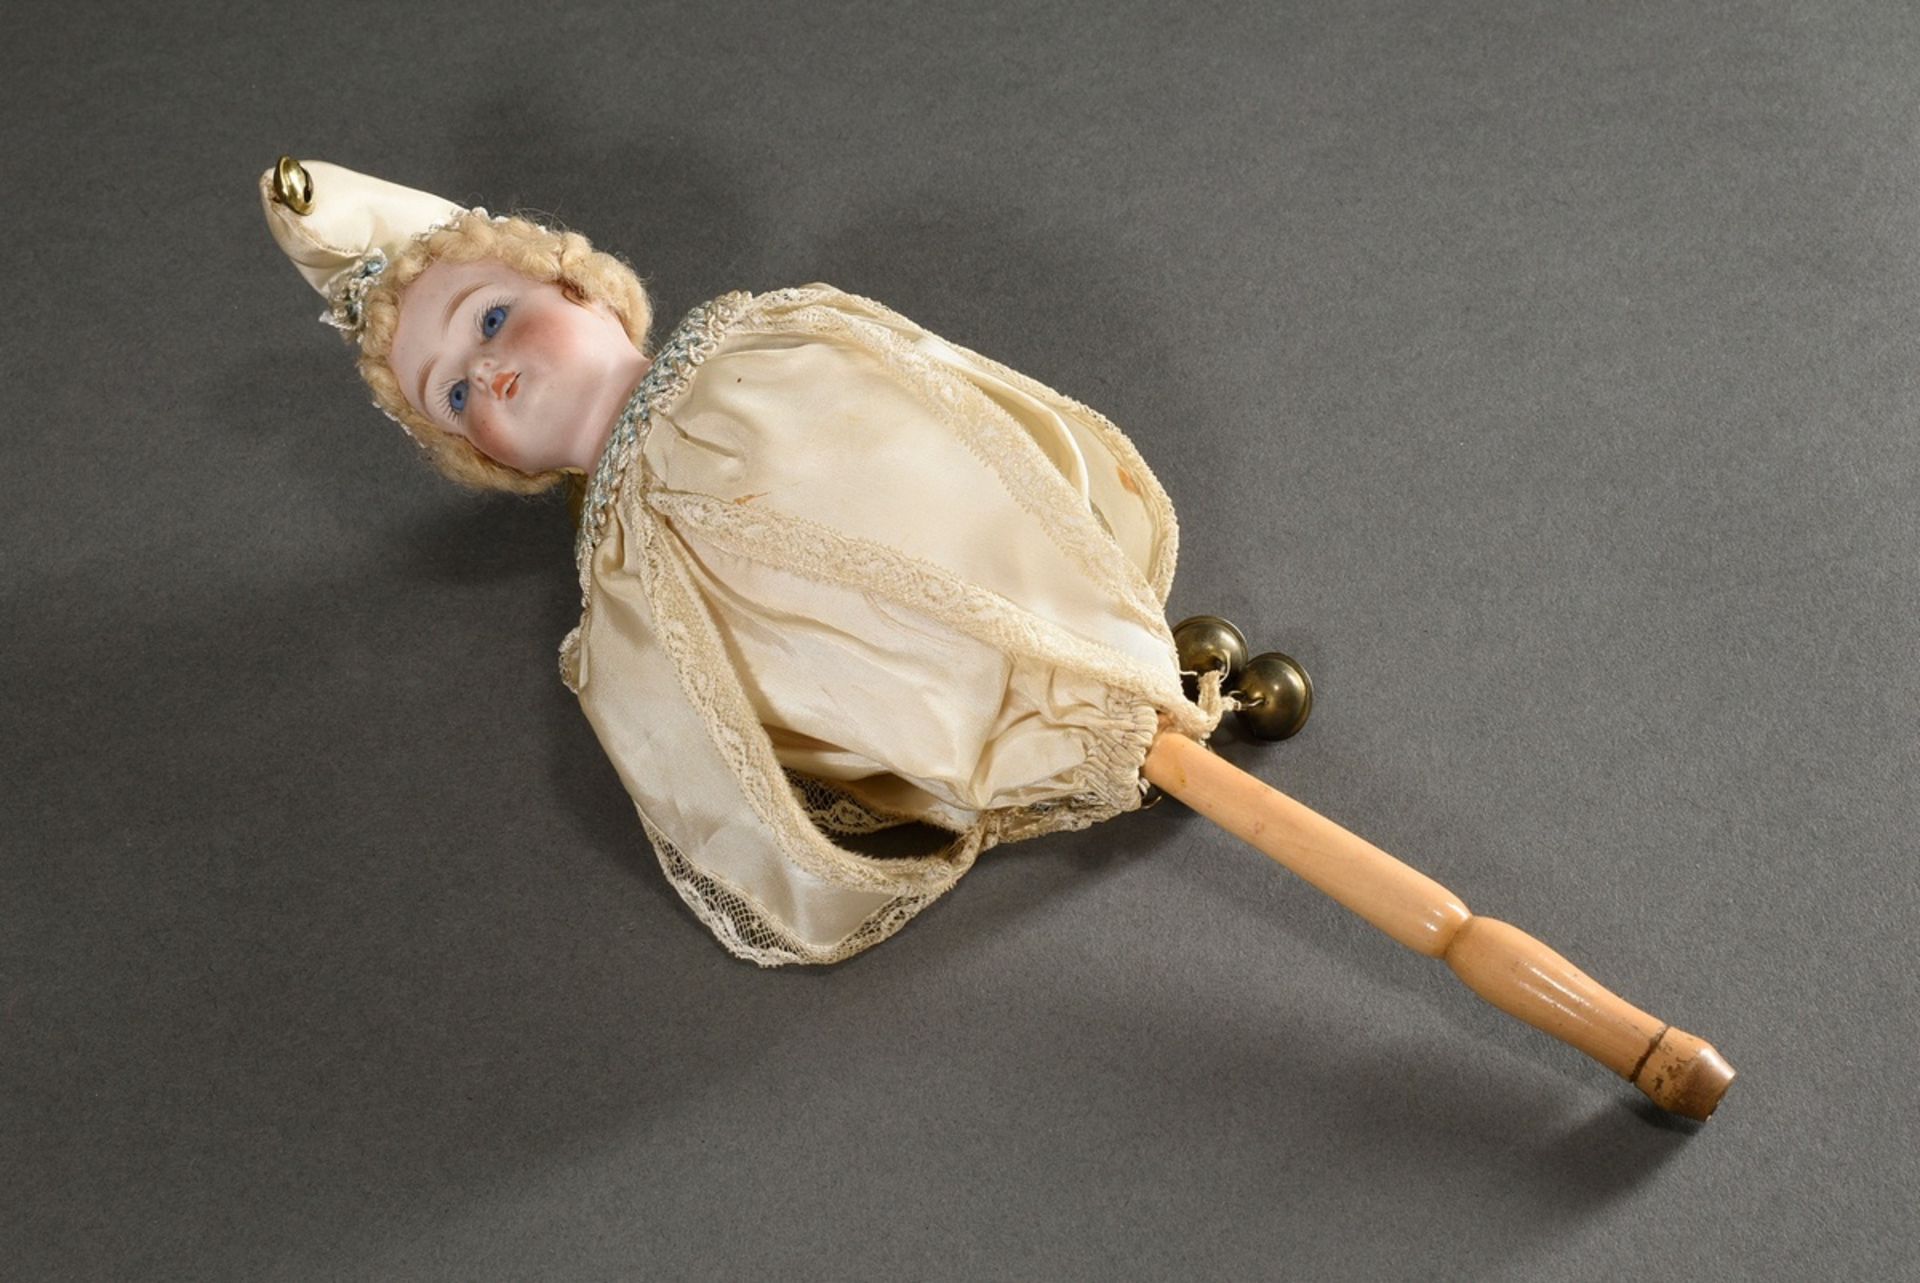 Marotte revolving doll on wooden stick with flute and music box, porcelain chest head with blue gla - Image 5 of 5